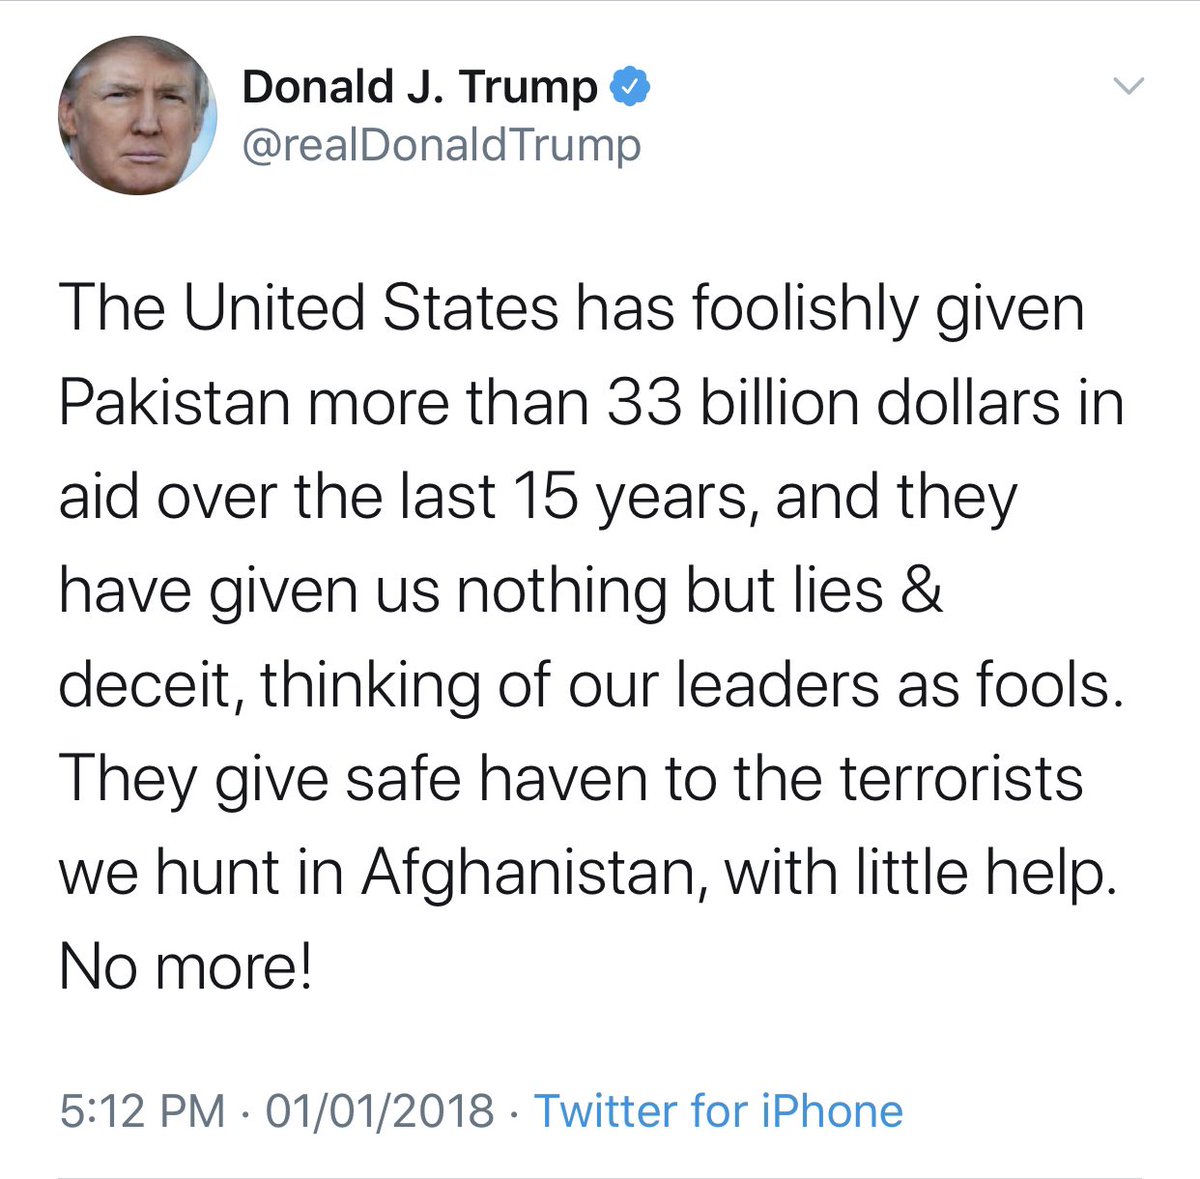 It’s Important to mention this was the Time when The US President had clearly implicated that Pakistan’s actions to address Terror Financing & Money Laundering were inadequate, Undermining Pakistan’s efforts towards War on Terror, A Diplomatic Disaster given Geostrategic Politics